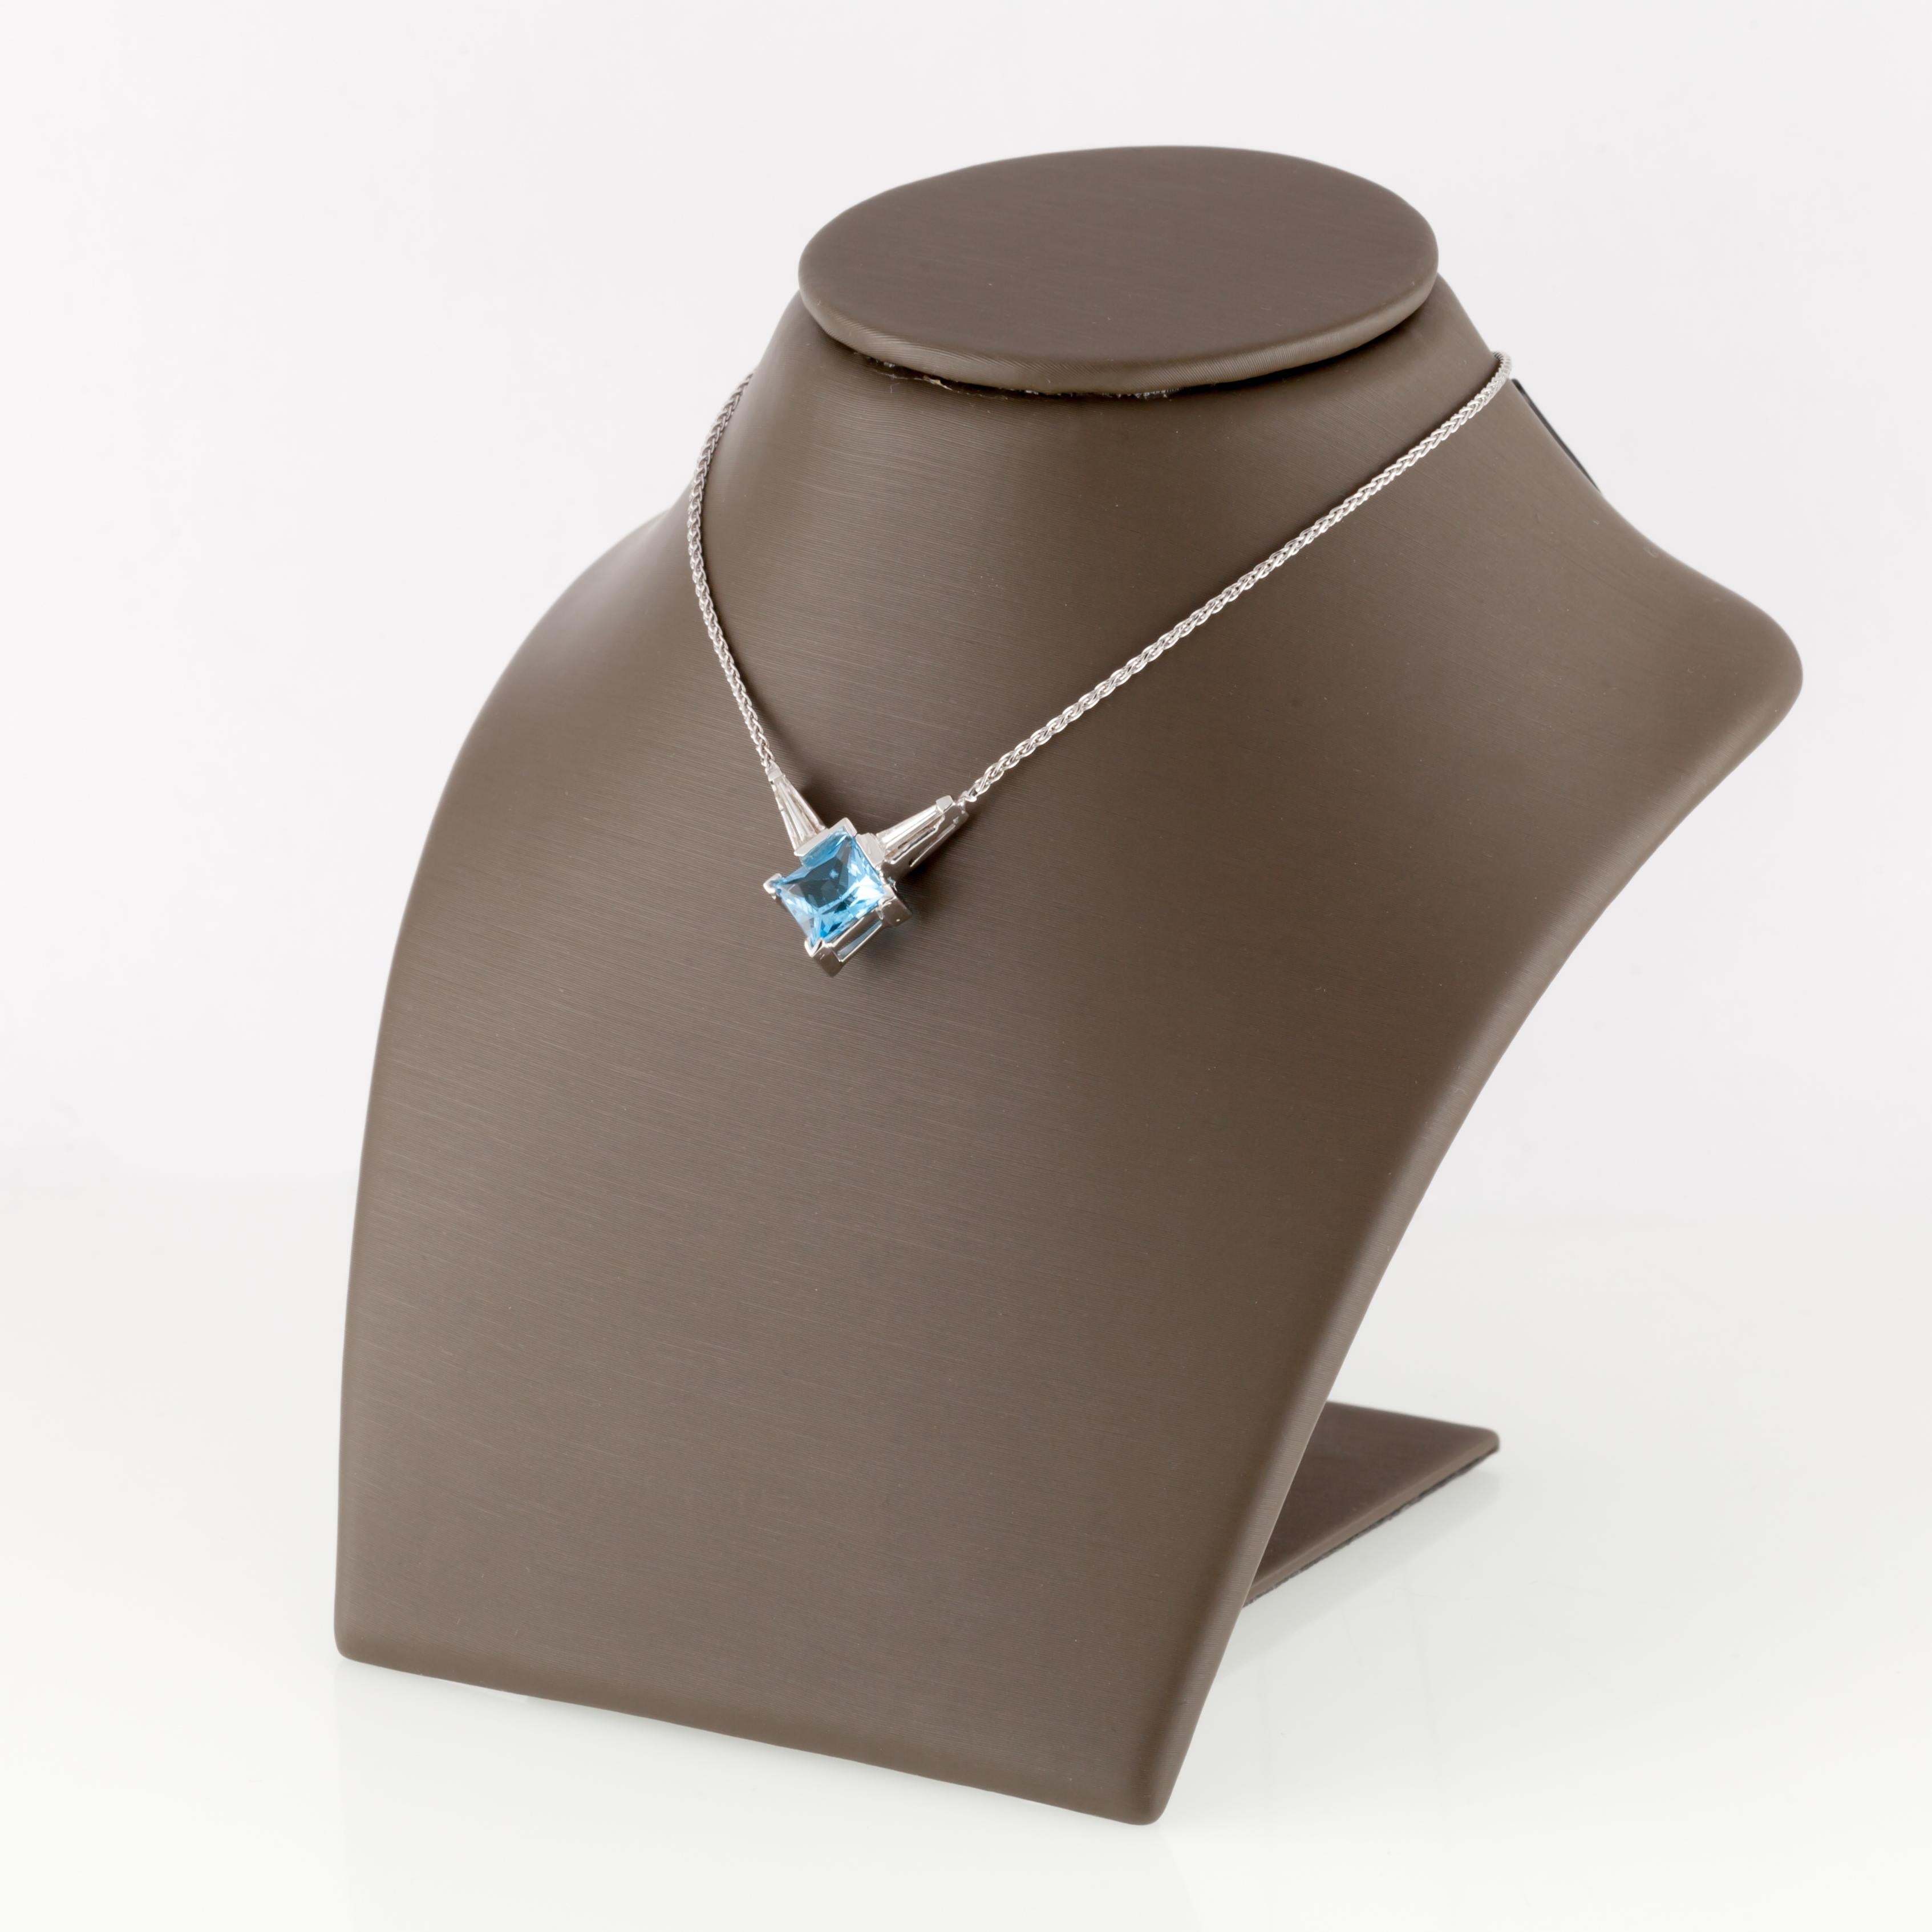 Modern 14k White Gold Blue Topaz Pendant with 0.25 Carat Diamond Accents & Gold Chain For Sale